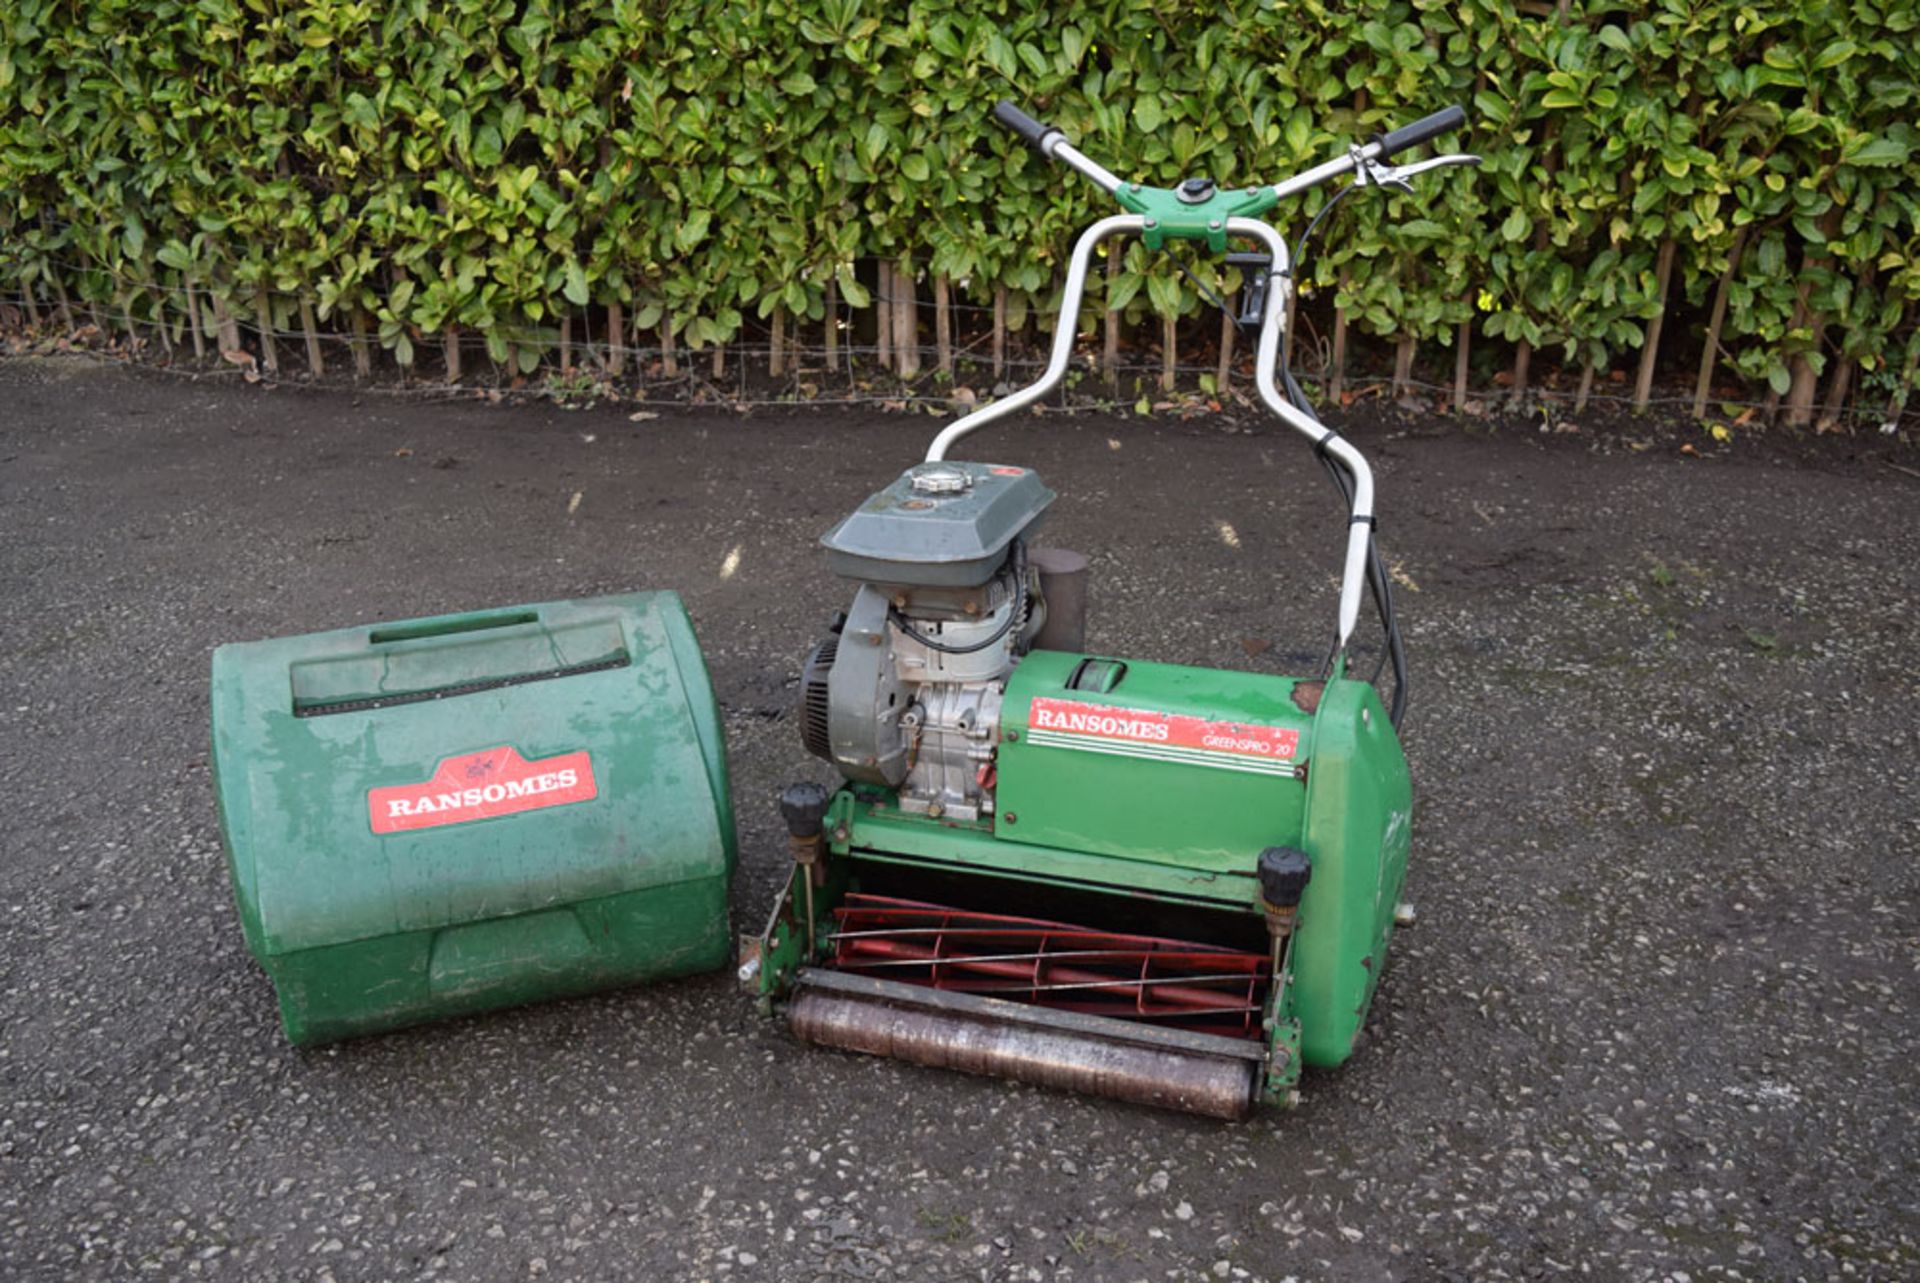 Ransomes GreensPro 20 10 Blade Cylinder Mower - Image 2 of 7